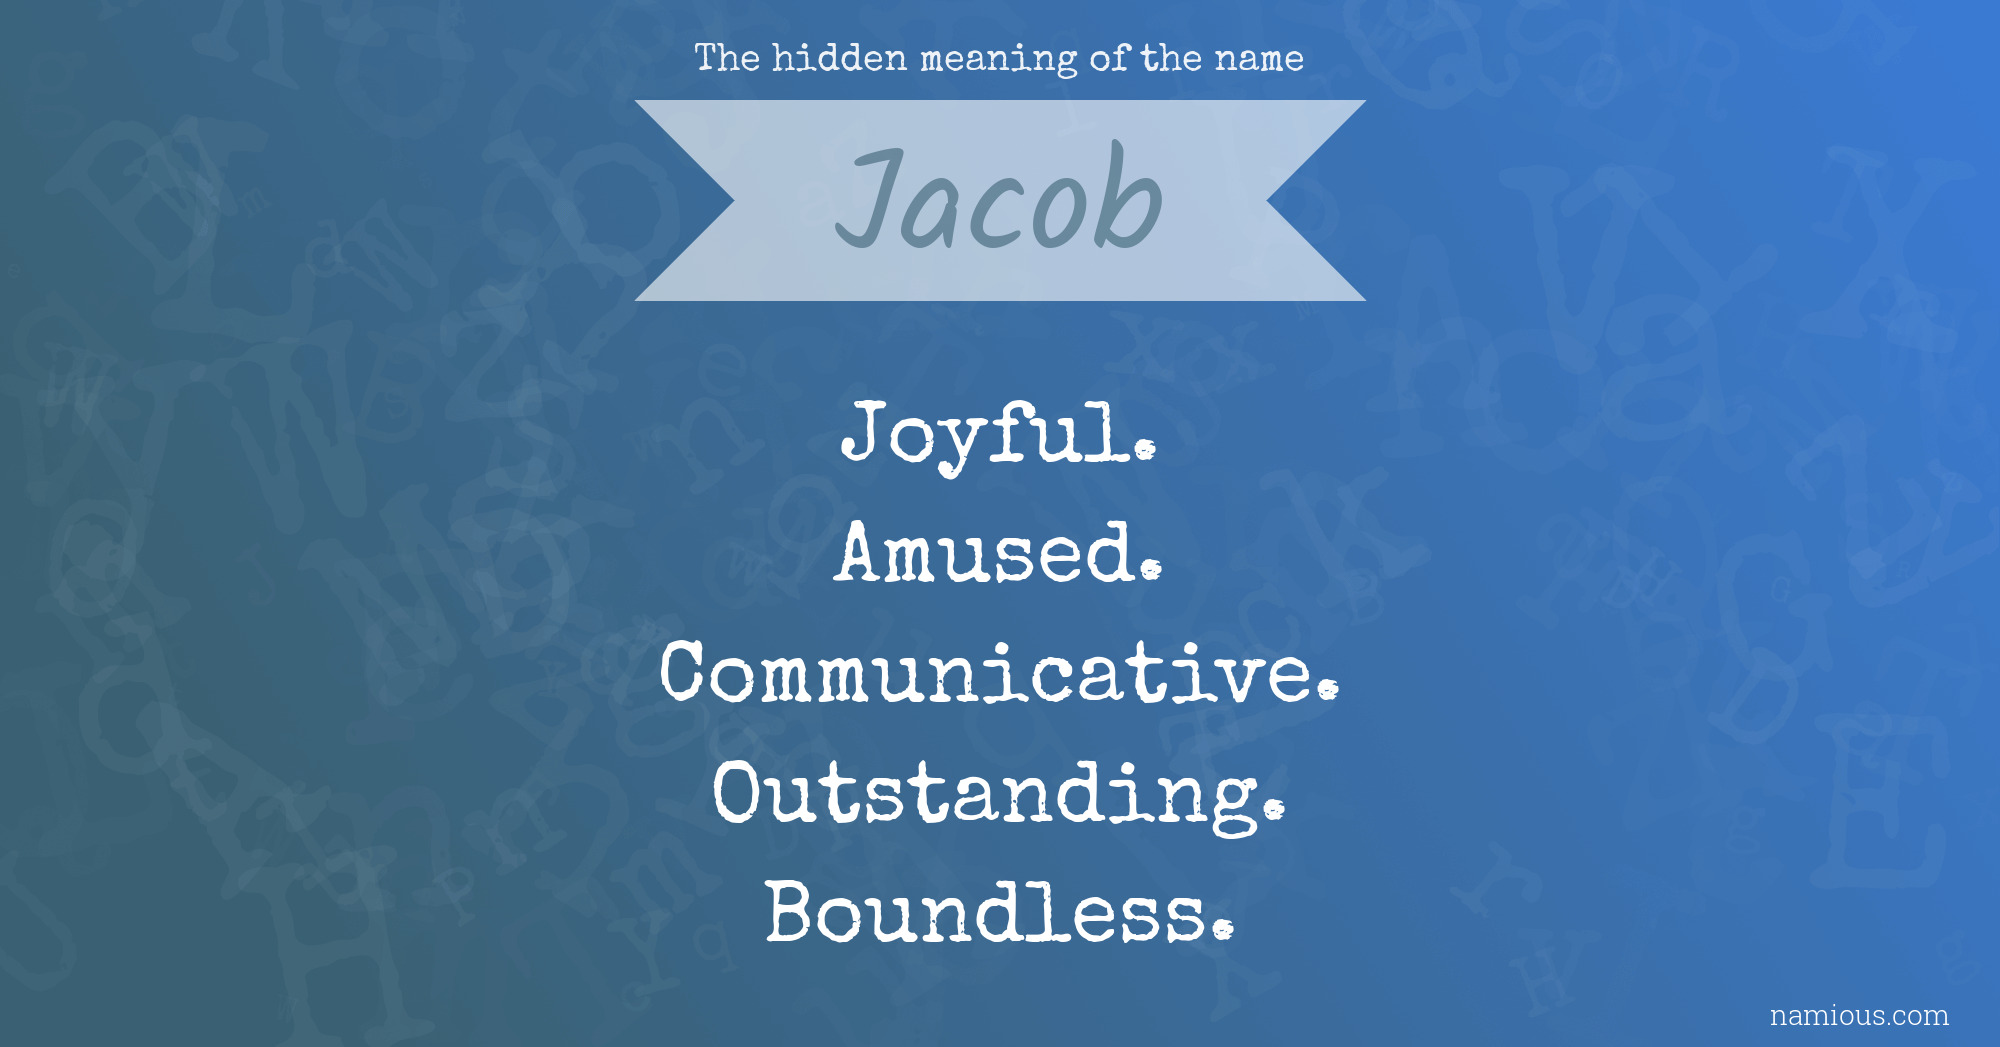 what does the name of jacob mean